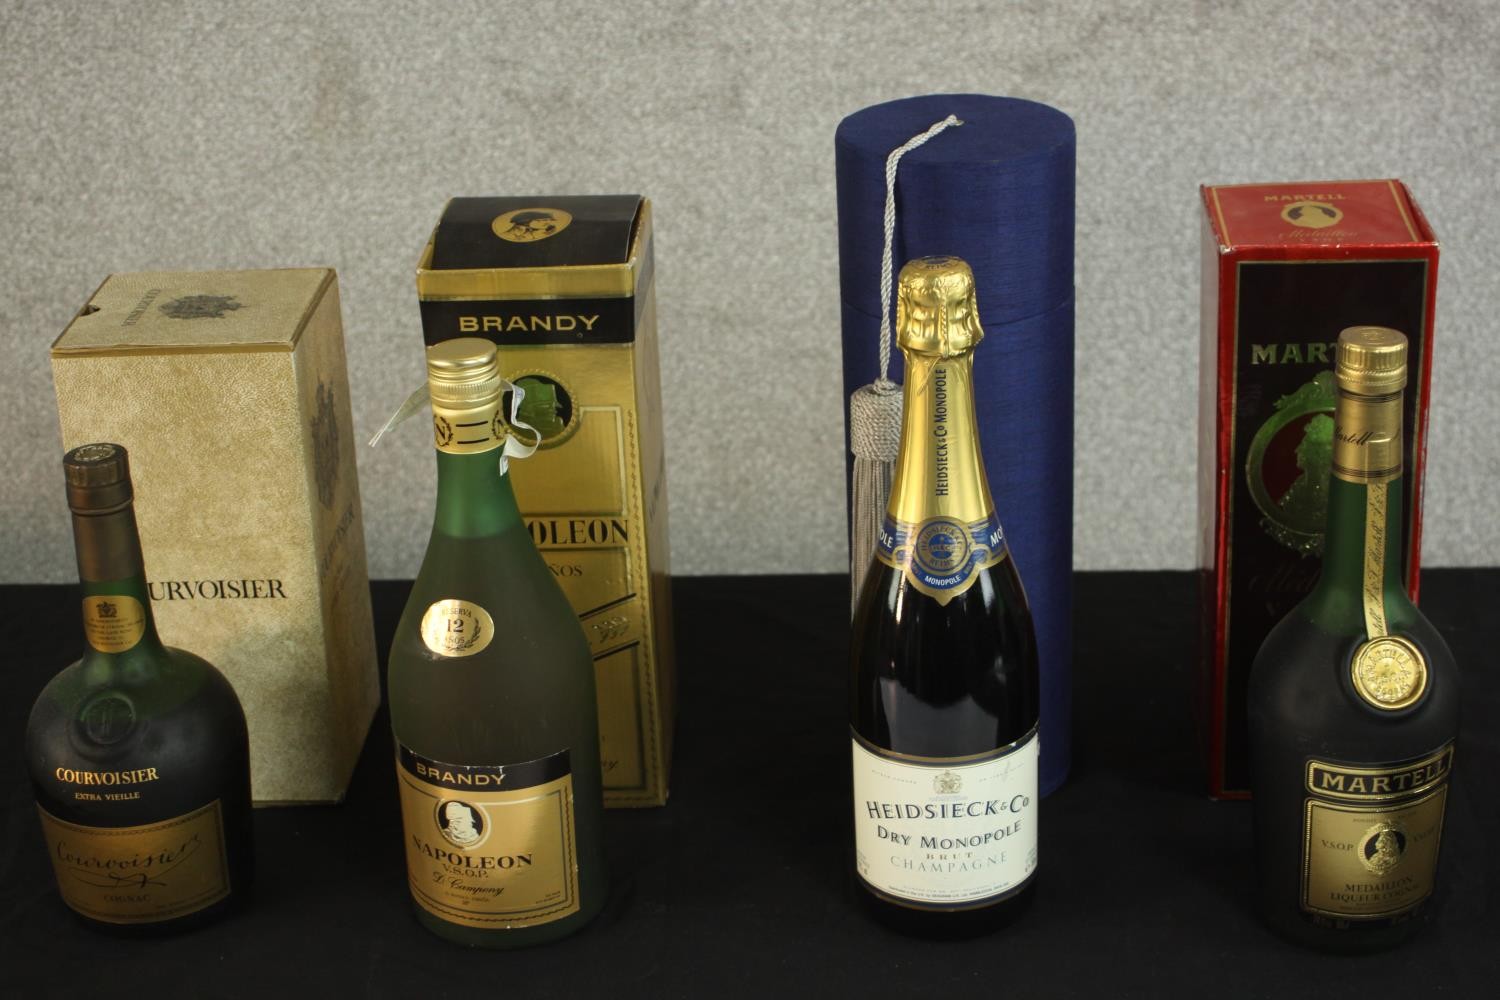 Four bottles of boxed spirits and champagne, including a bottle of Courvoisier Extra Vieille cognac, - Image 3 of 7